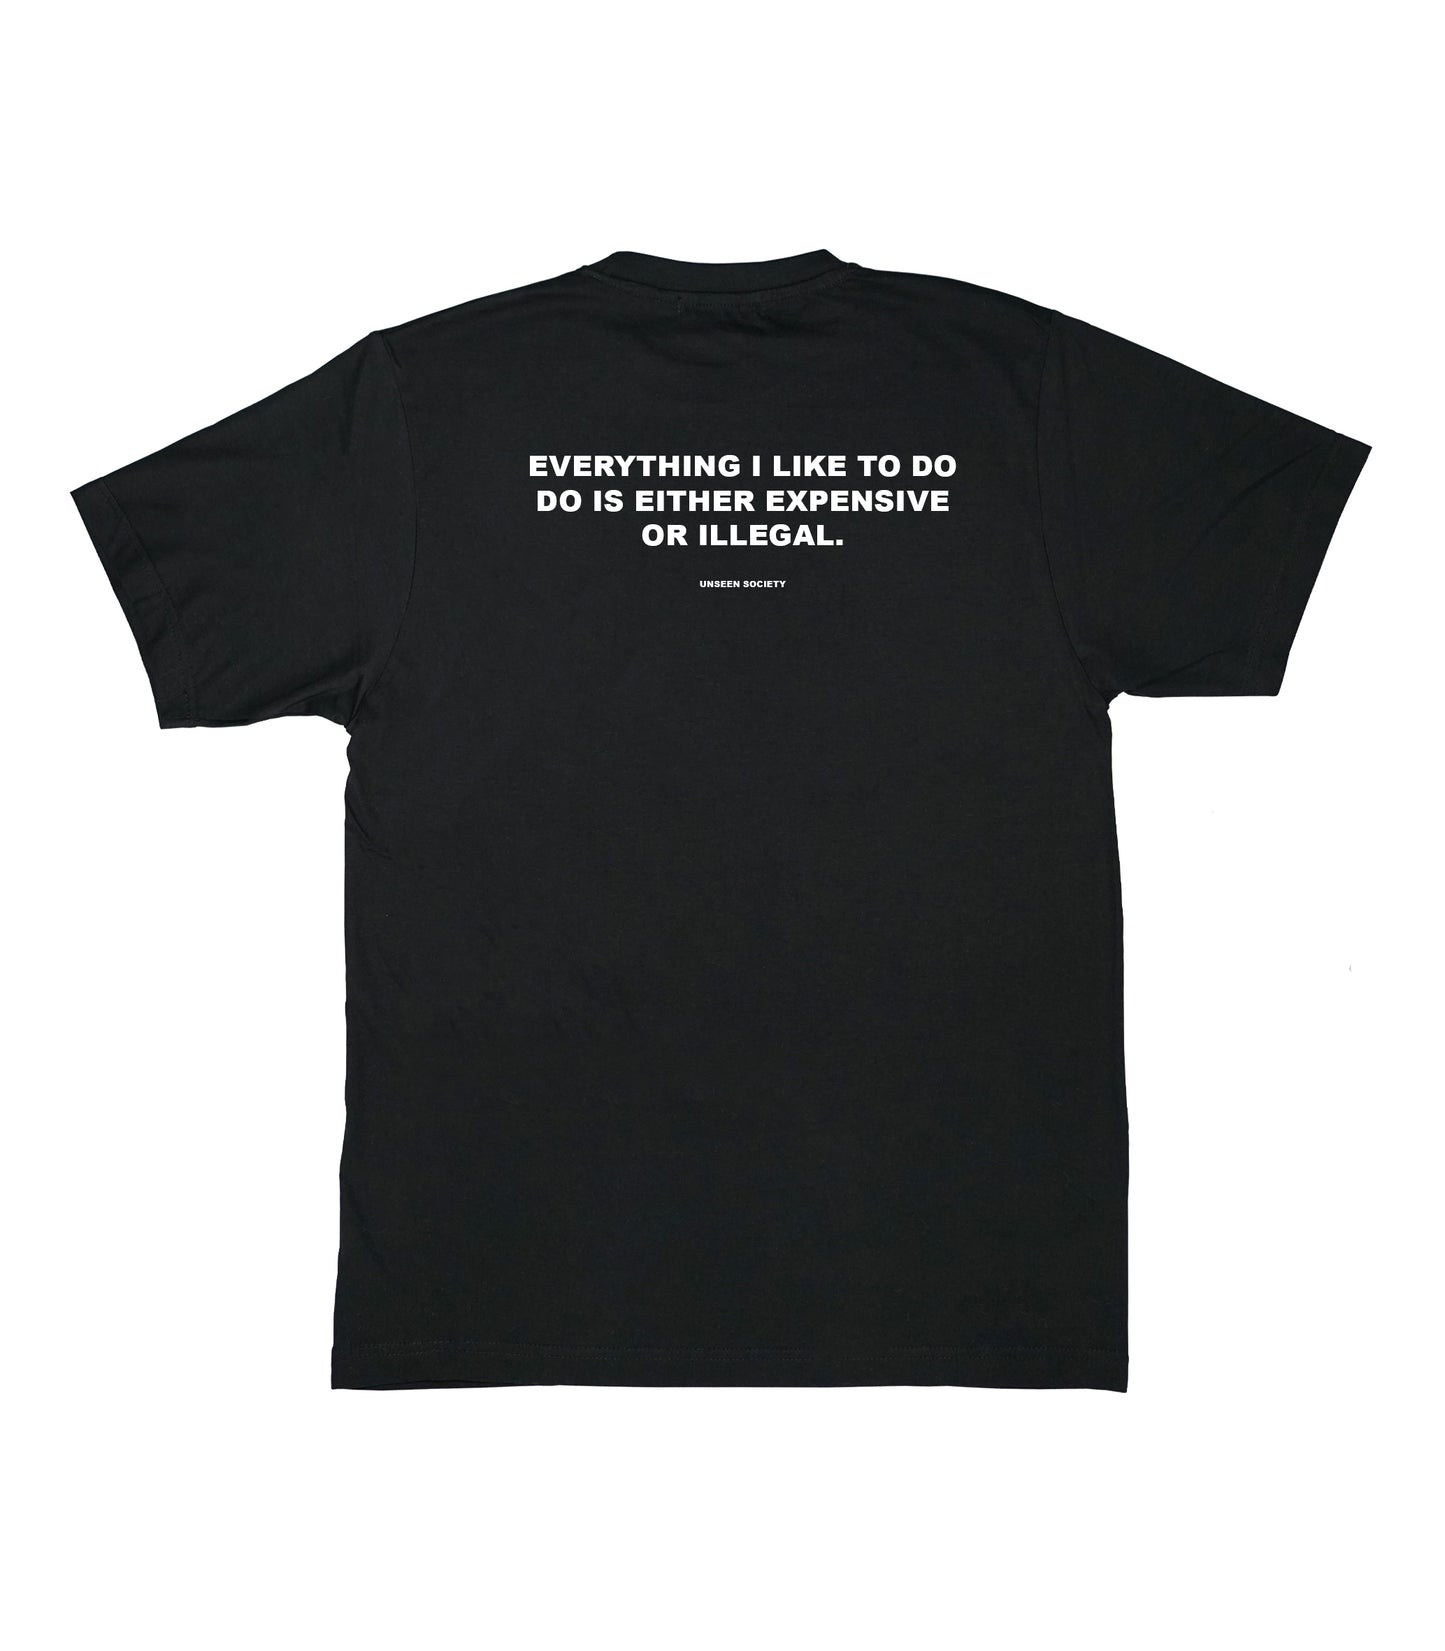 Expensive or illegal quote tee